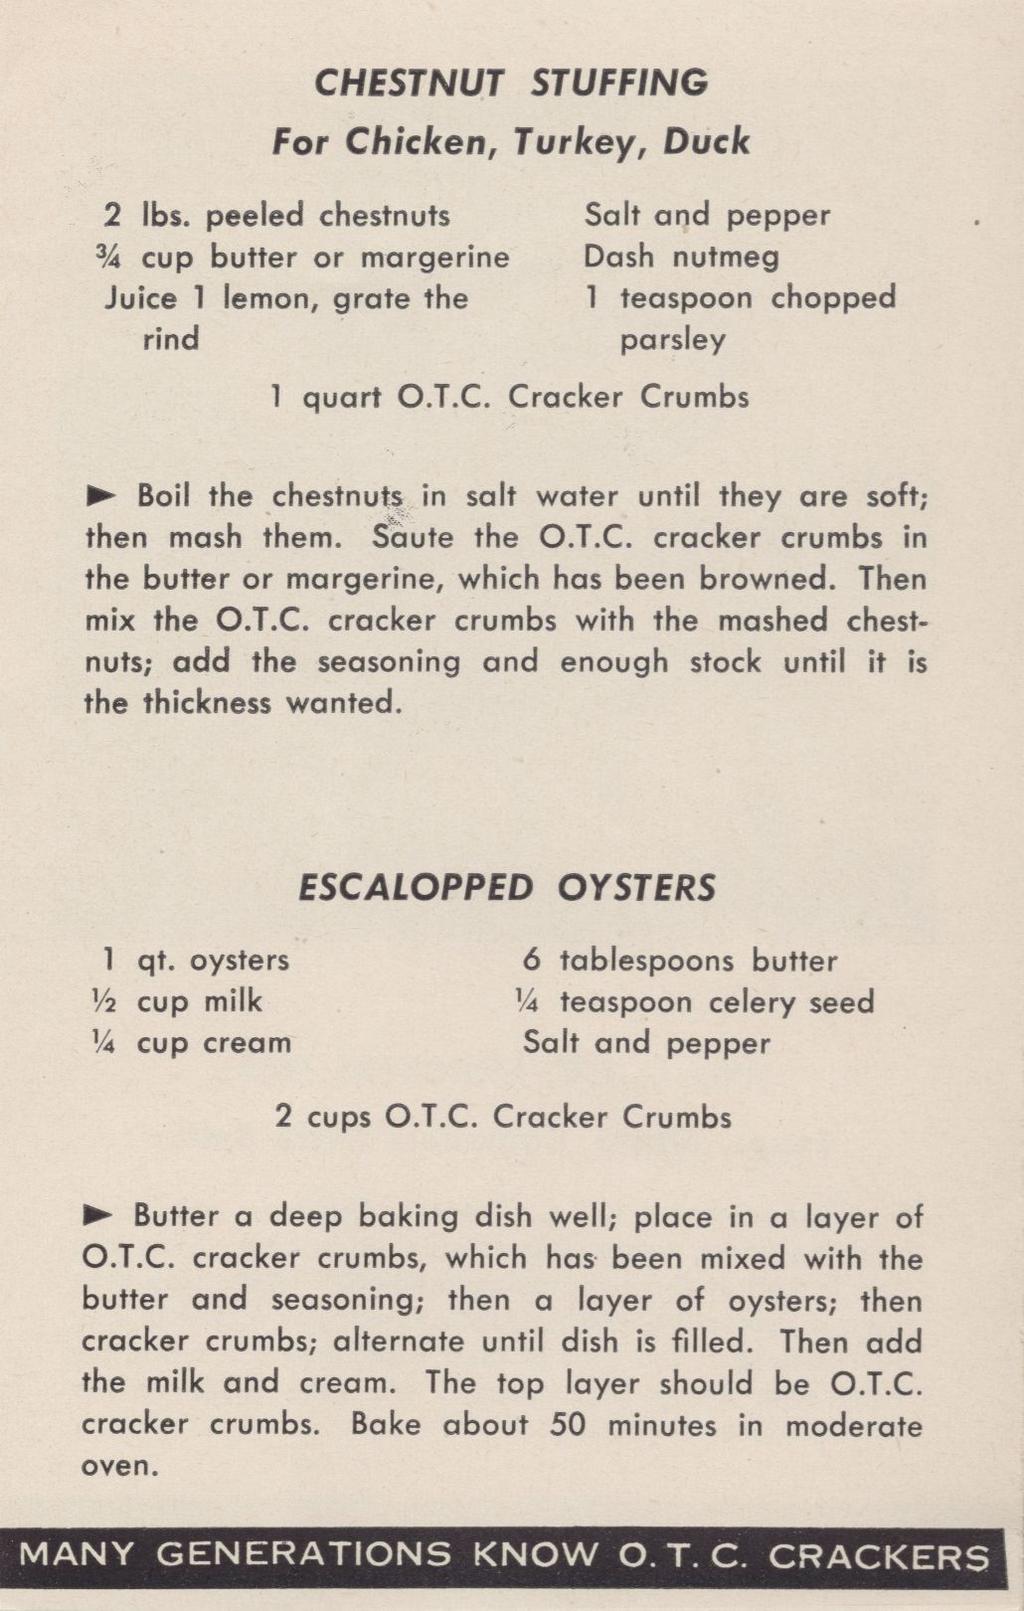 CHESTNUT STUFFING For Chicken, Turkey, Duck 2 lbs. peeled chestnuts 3 /A cup butter or margerine Juice 1 lemon, grate the rind Dash nutmeg 1 teaspoon chopped parsley 1 quart O.T.C. Cracker Crumbs Boil the chestnuts in salt water until they are soft; then mash them.